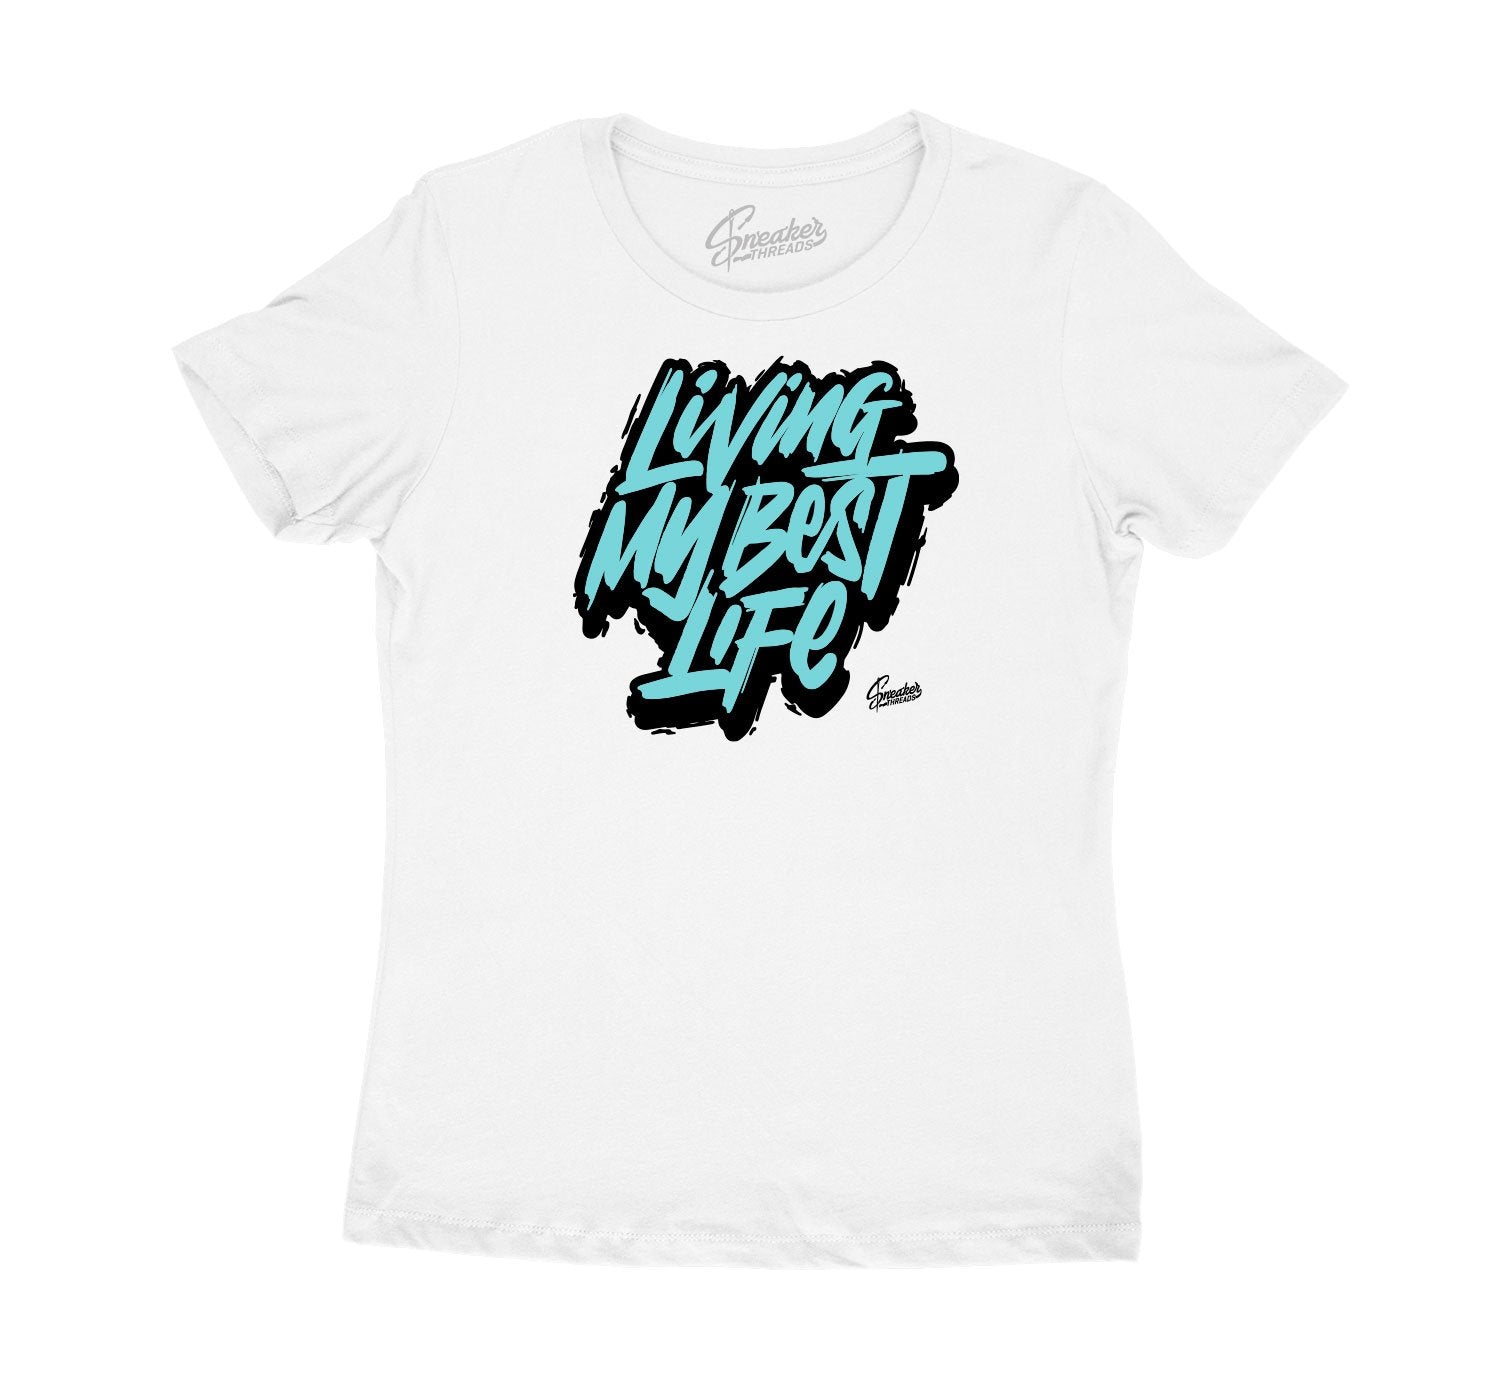 Living My Best Life Shirts for women to wear for Jordan 13 Island Green